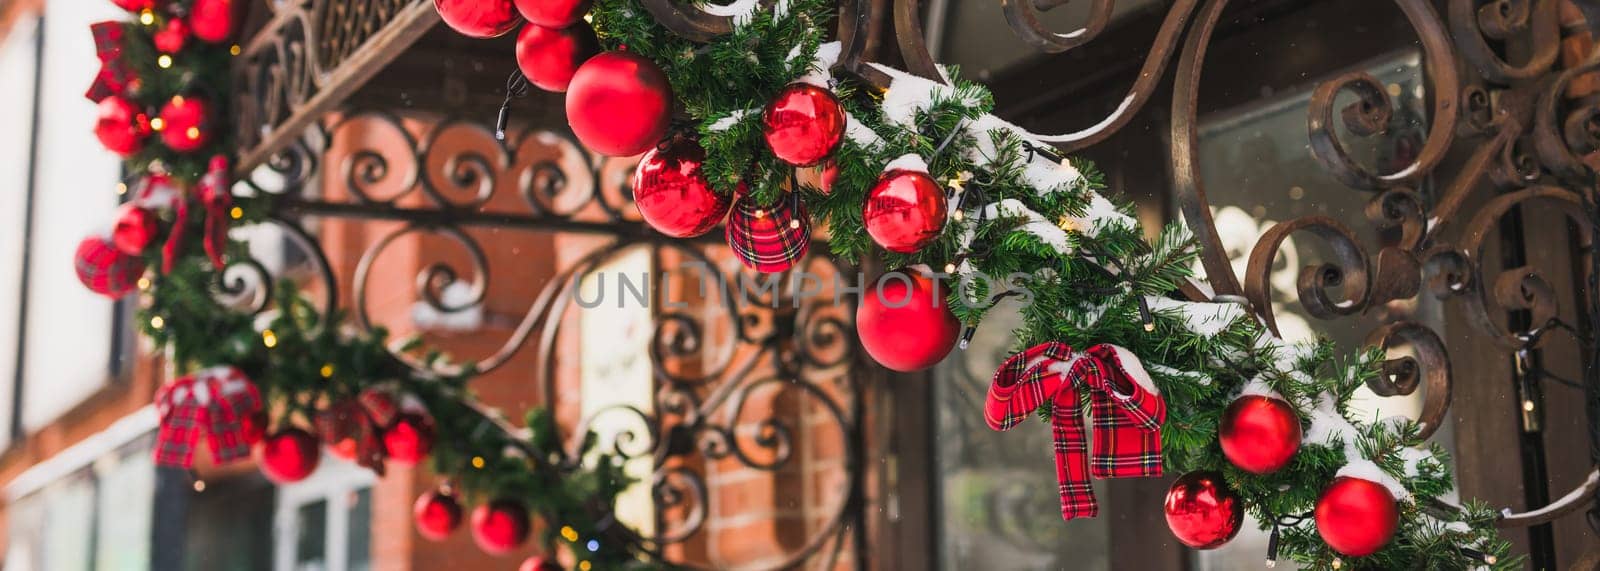 Banner stylish christmas fir branches with red baubles and sparkling garland on front of door at holiday market or restaurant in city street. Winter christmas street decor by Satura86